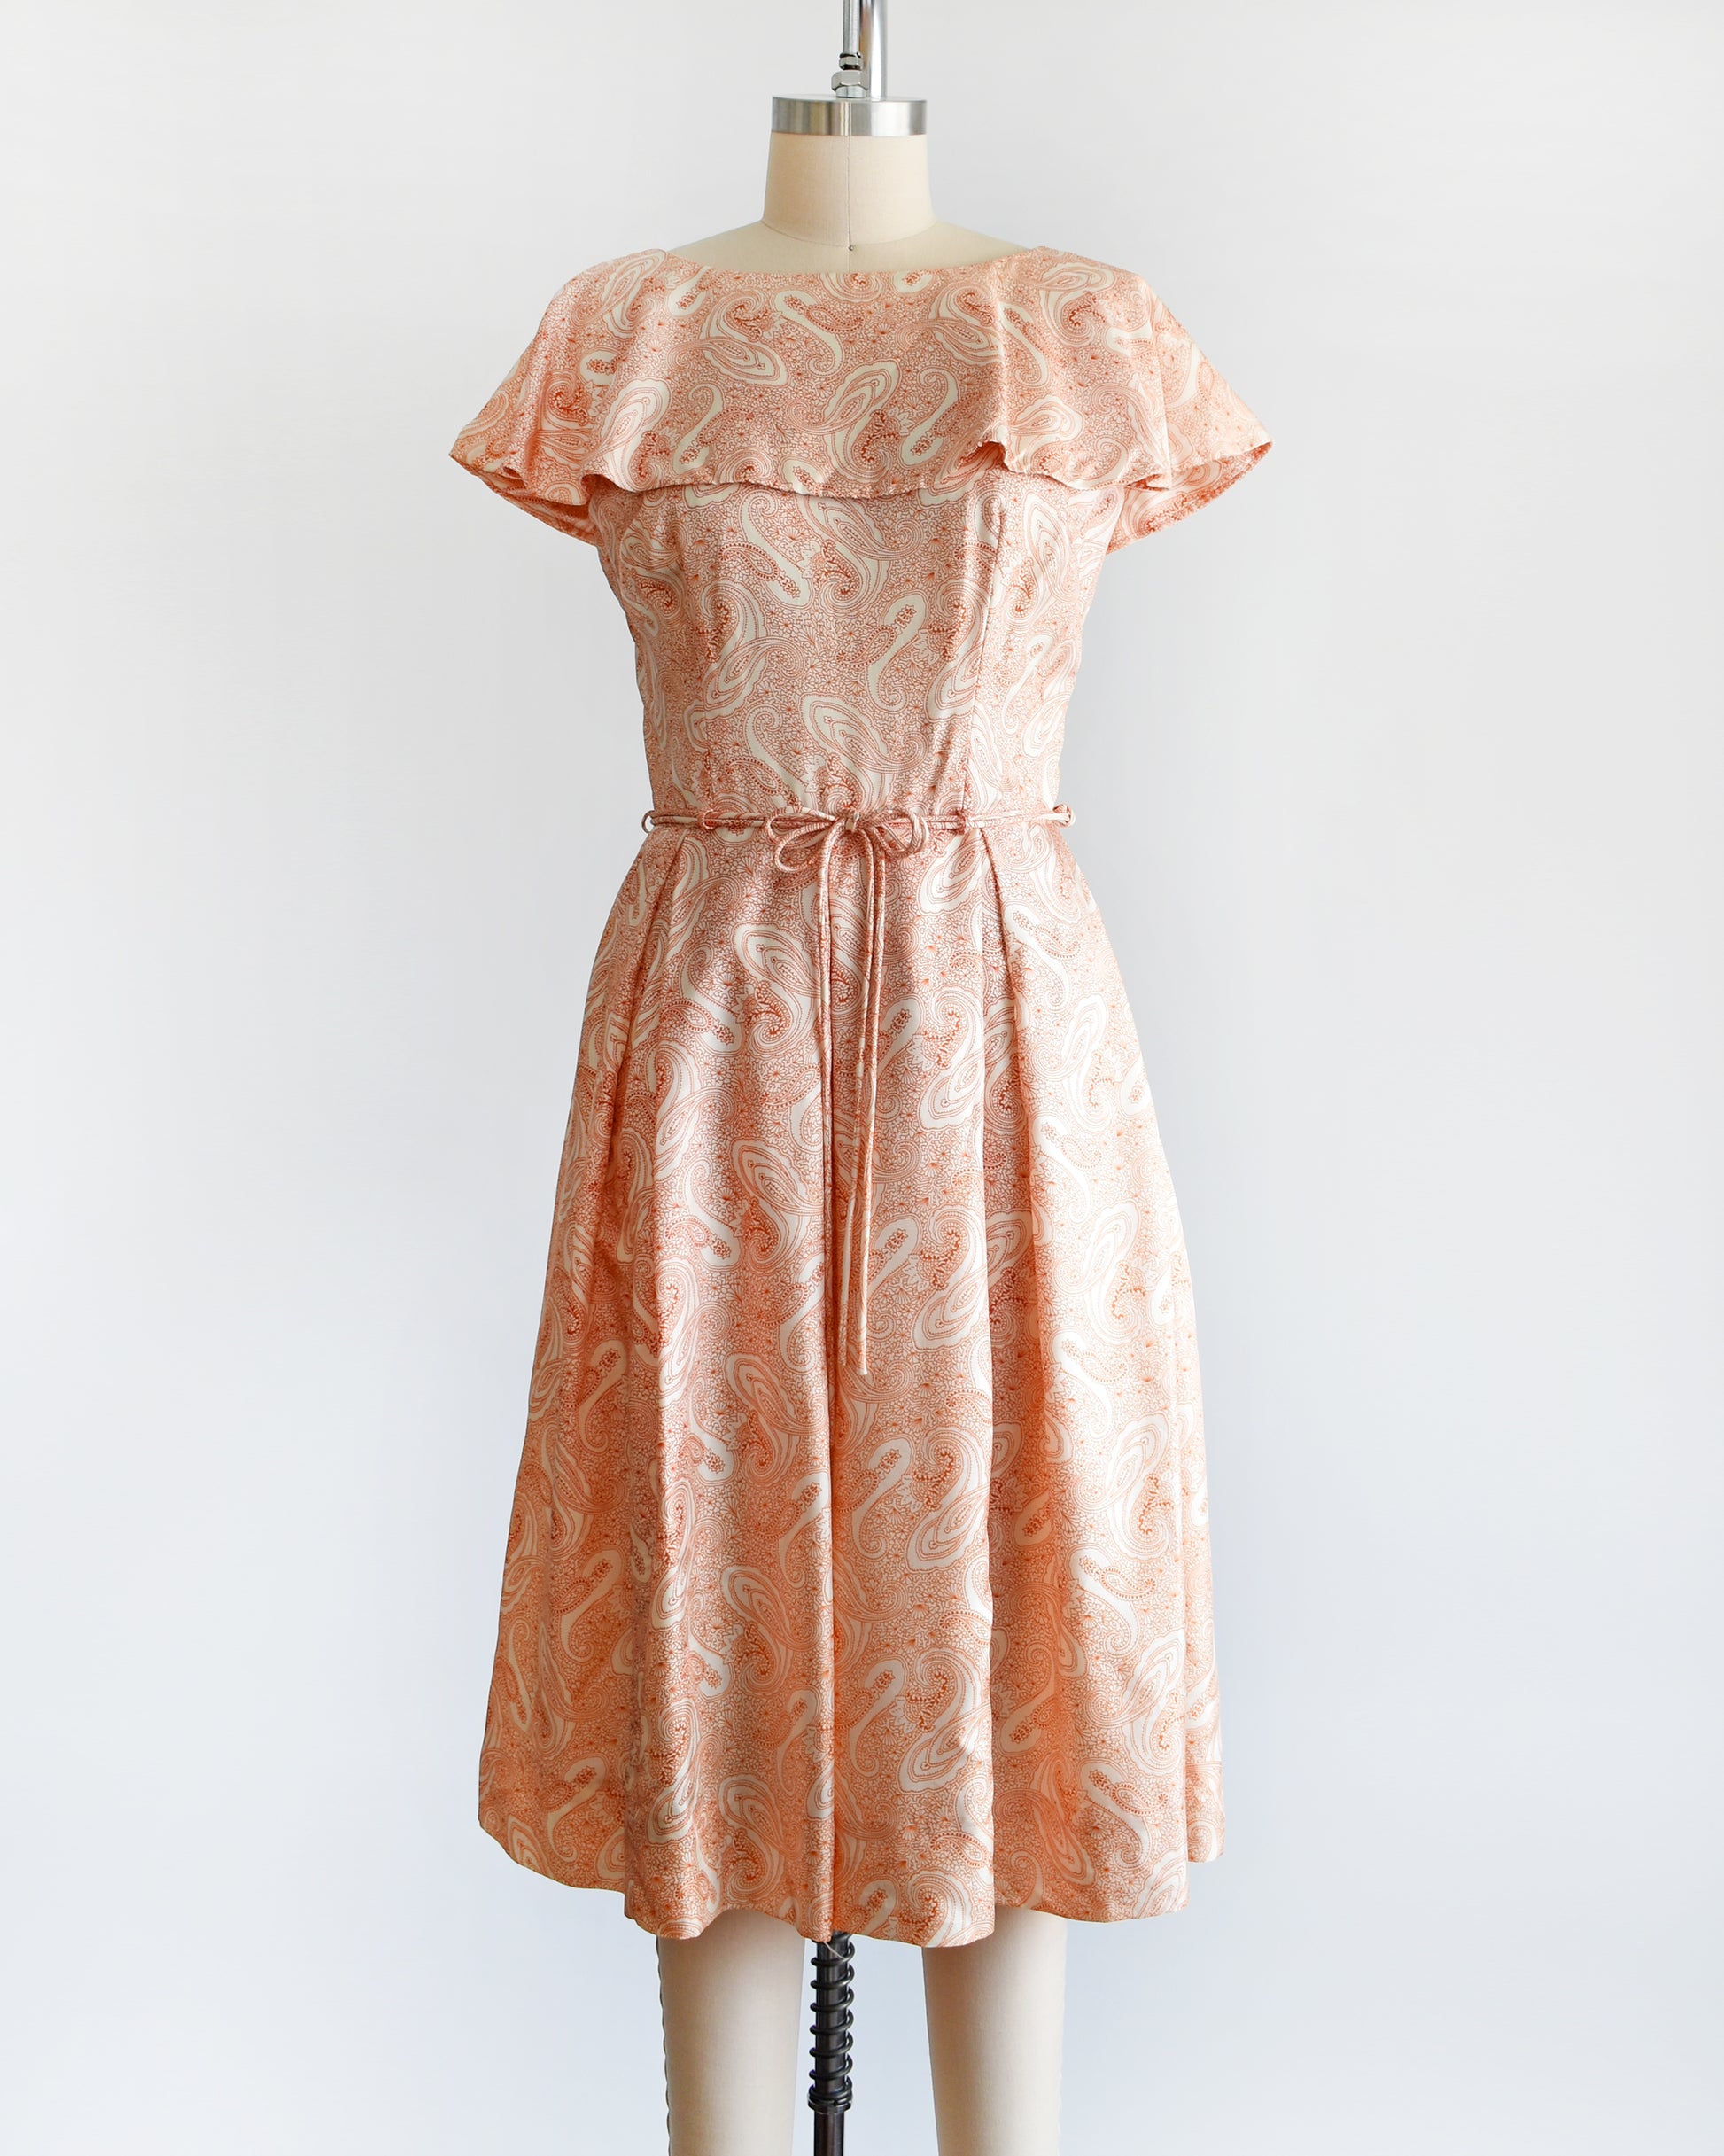 A vintage 1960s dress that features an orange and white paisley print, a ruffled collar, matching tie belt, and pleated skirt.